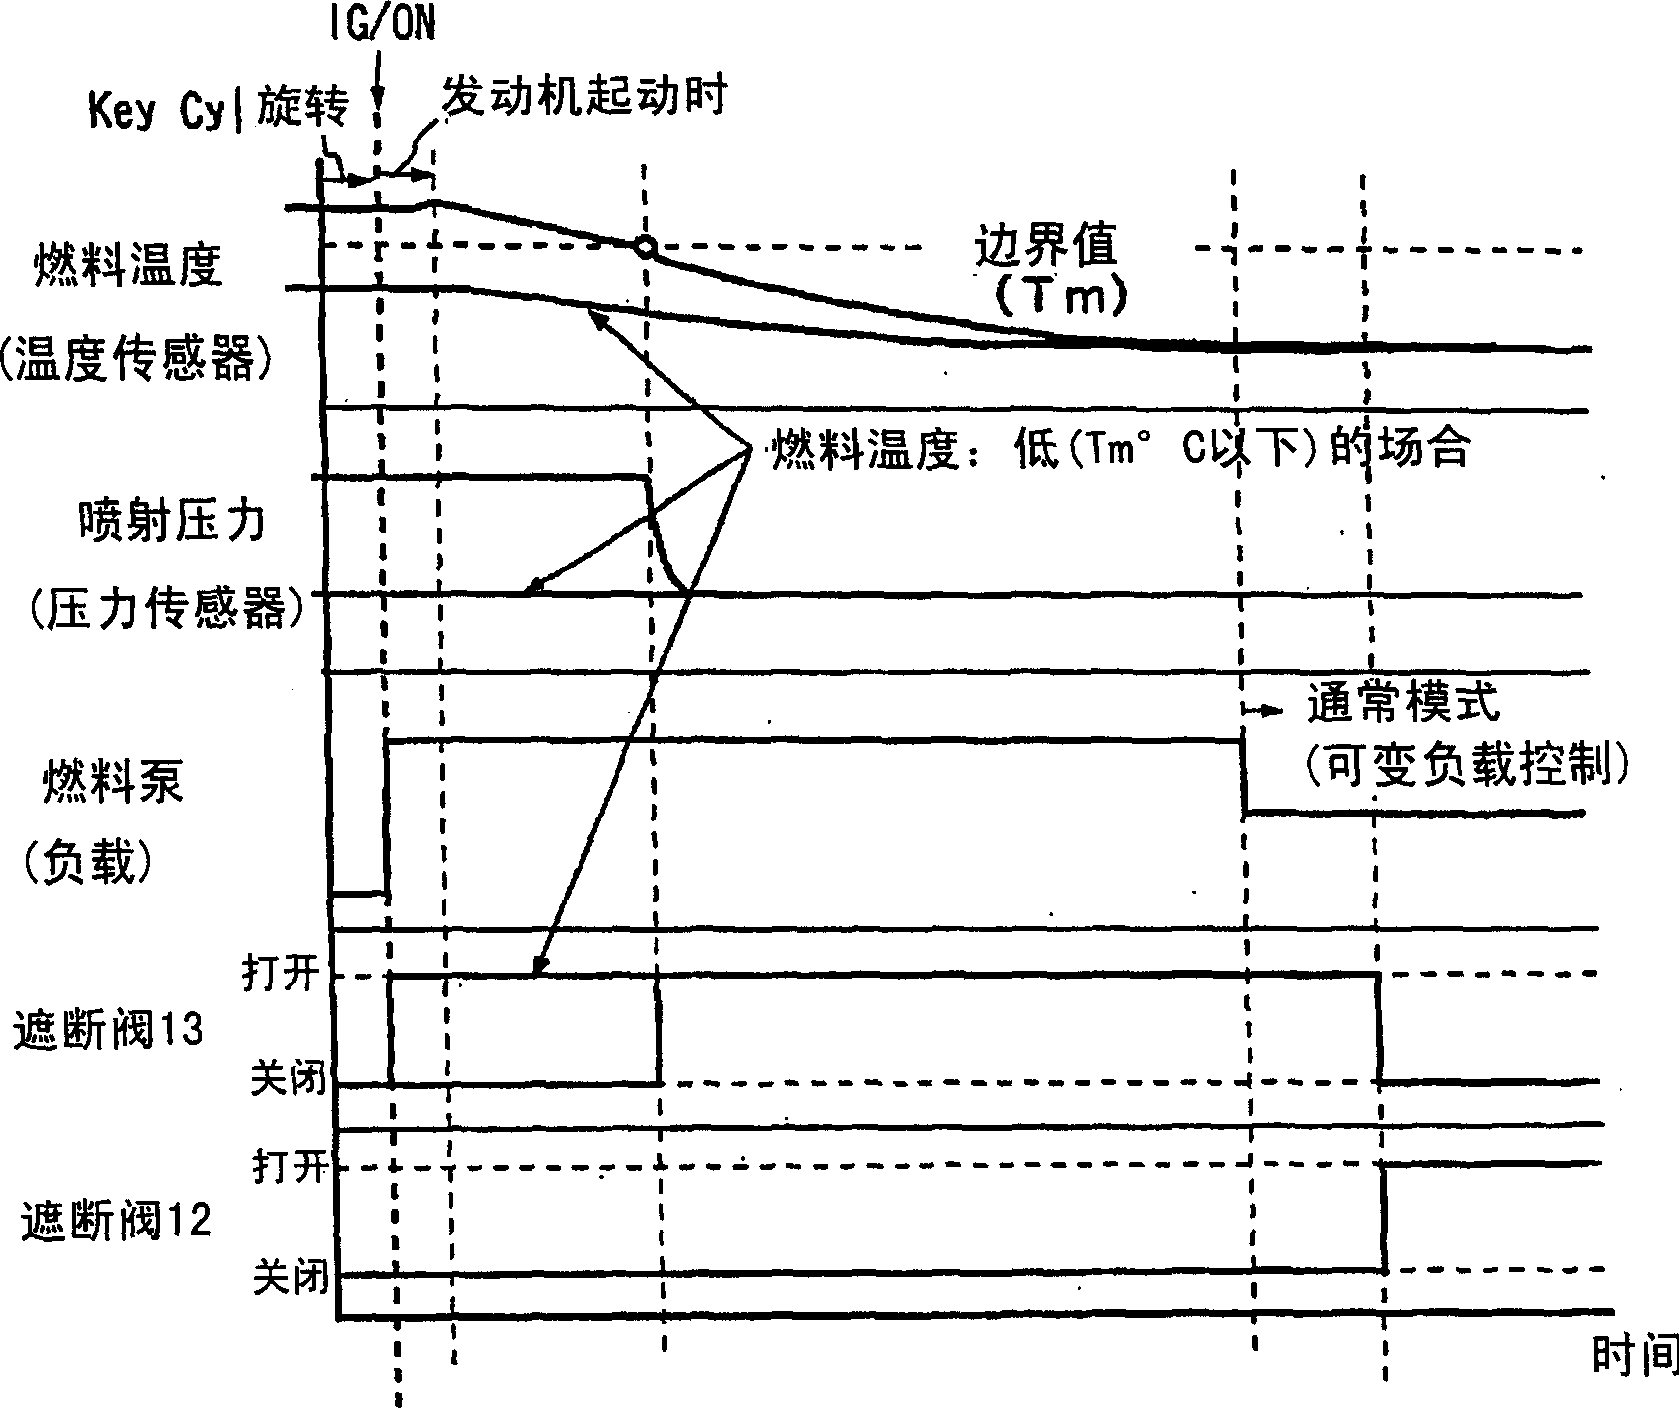 Engine fuel feed device